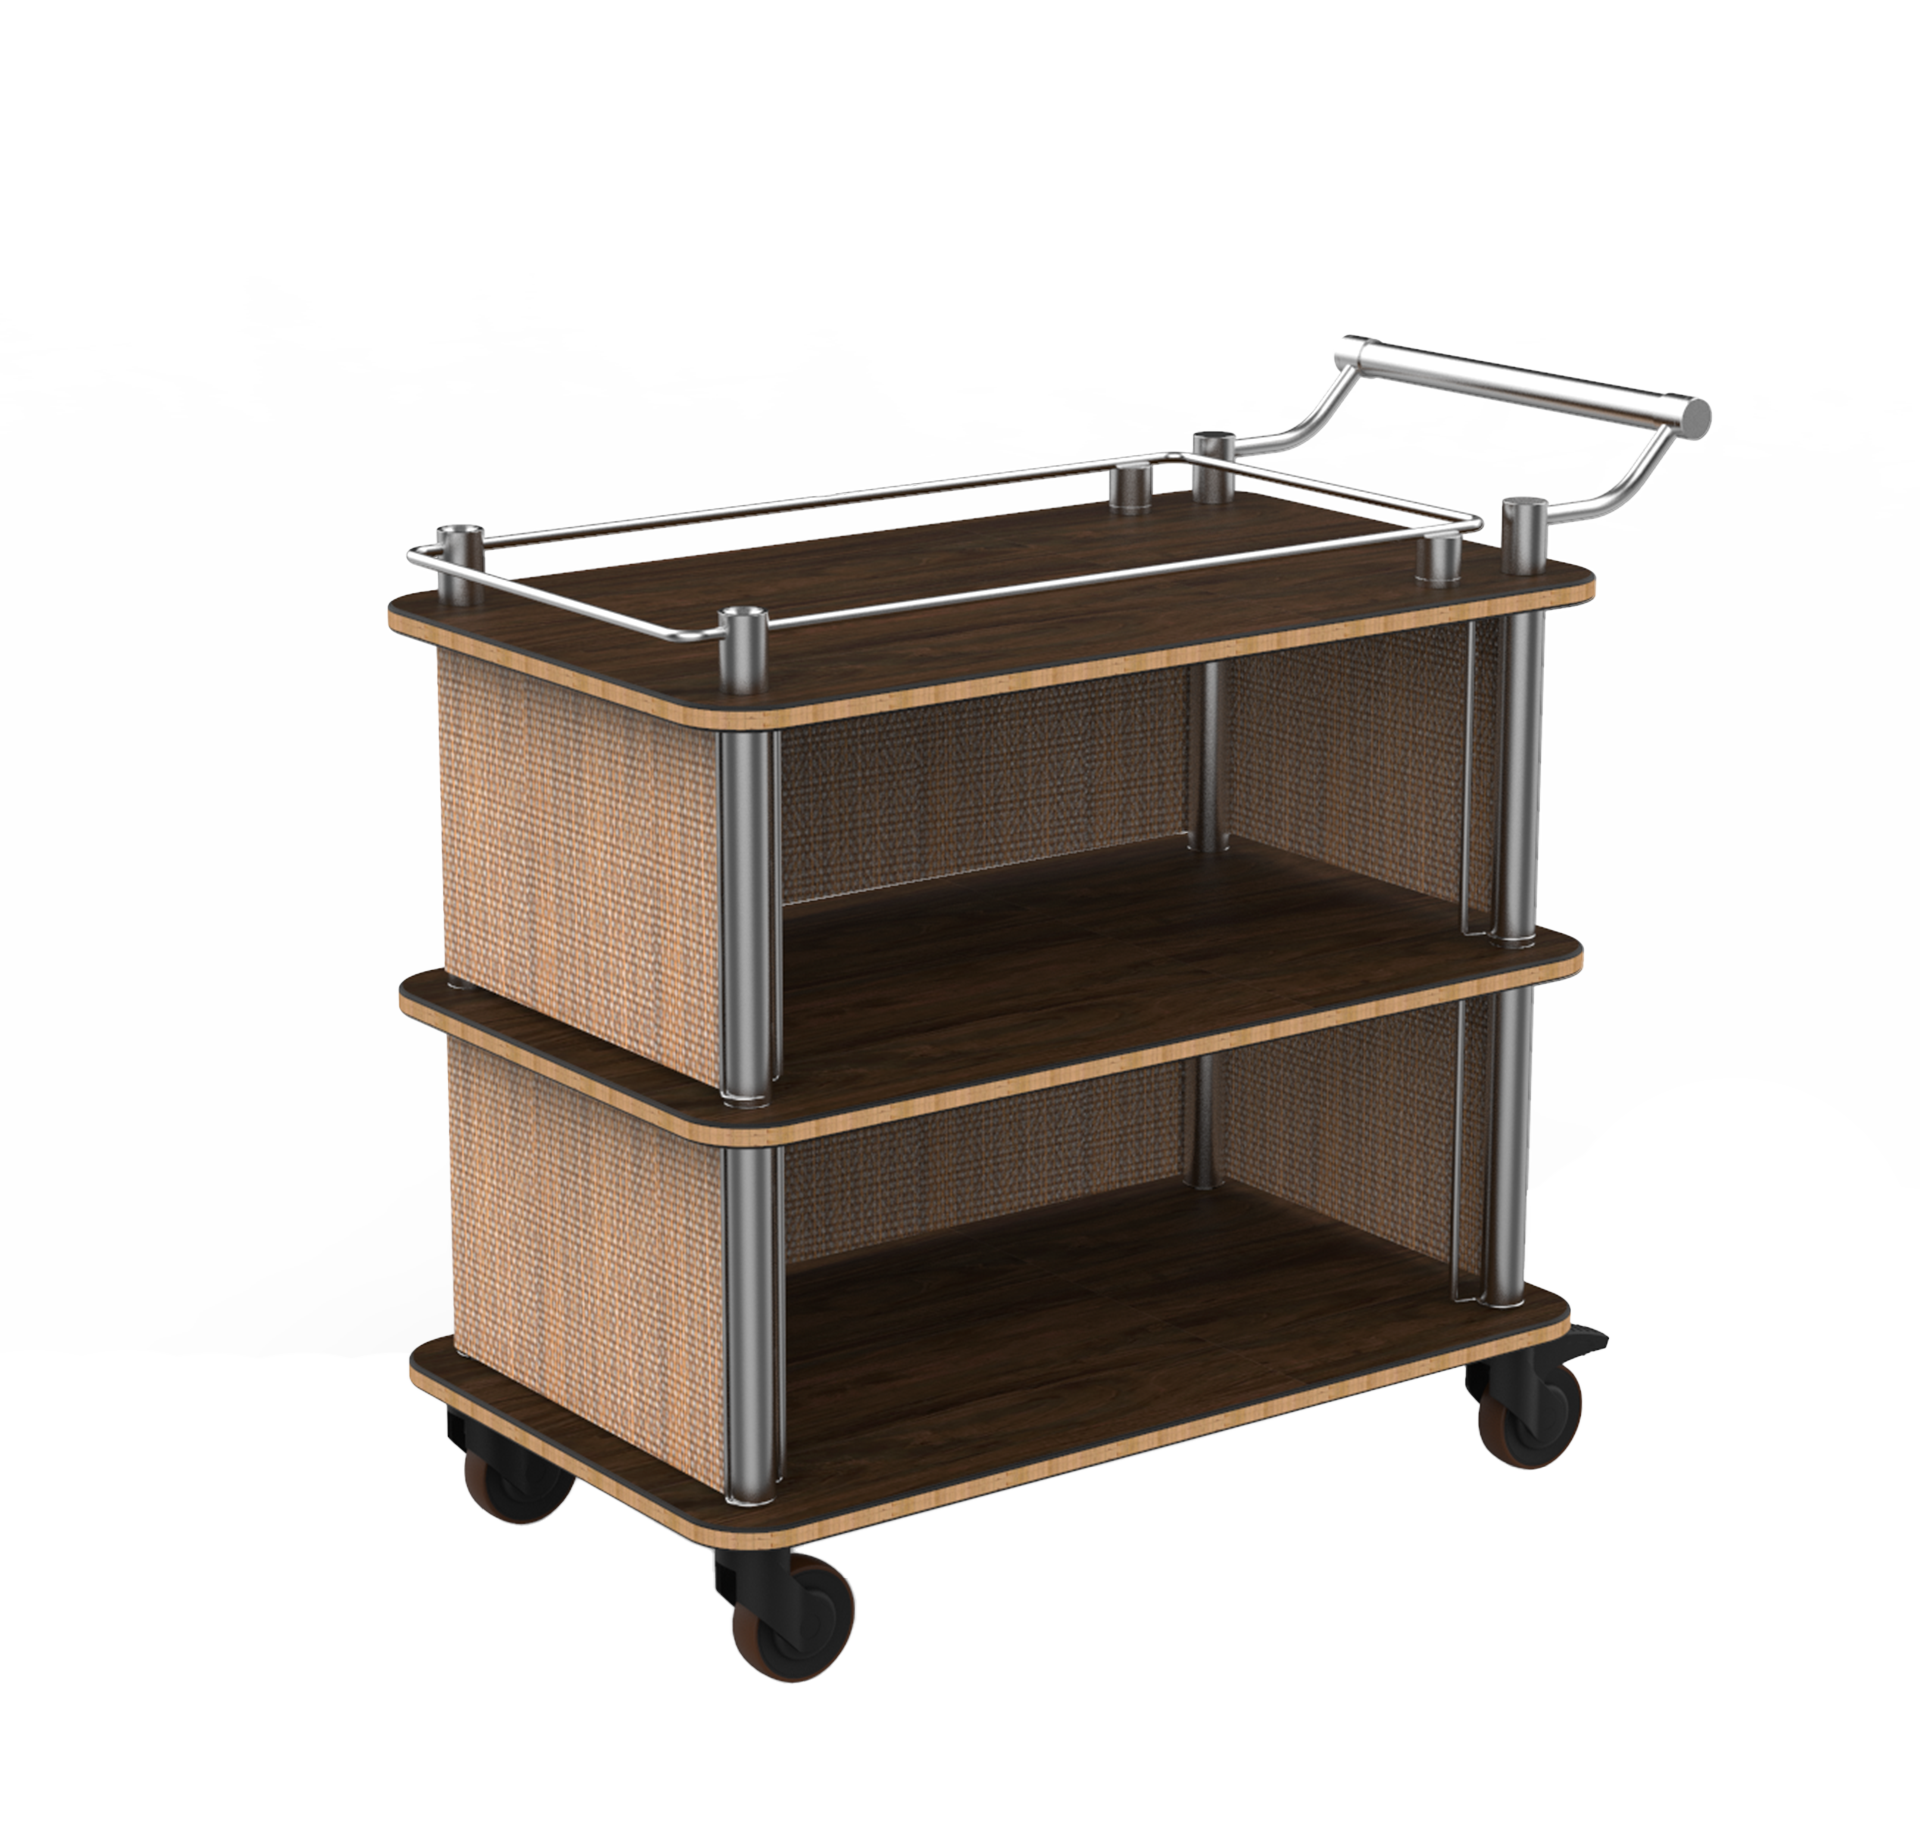 TOP BORDER CART WITH STAINLESS STEEL HANDLE